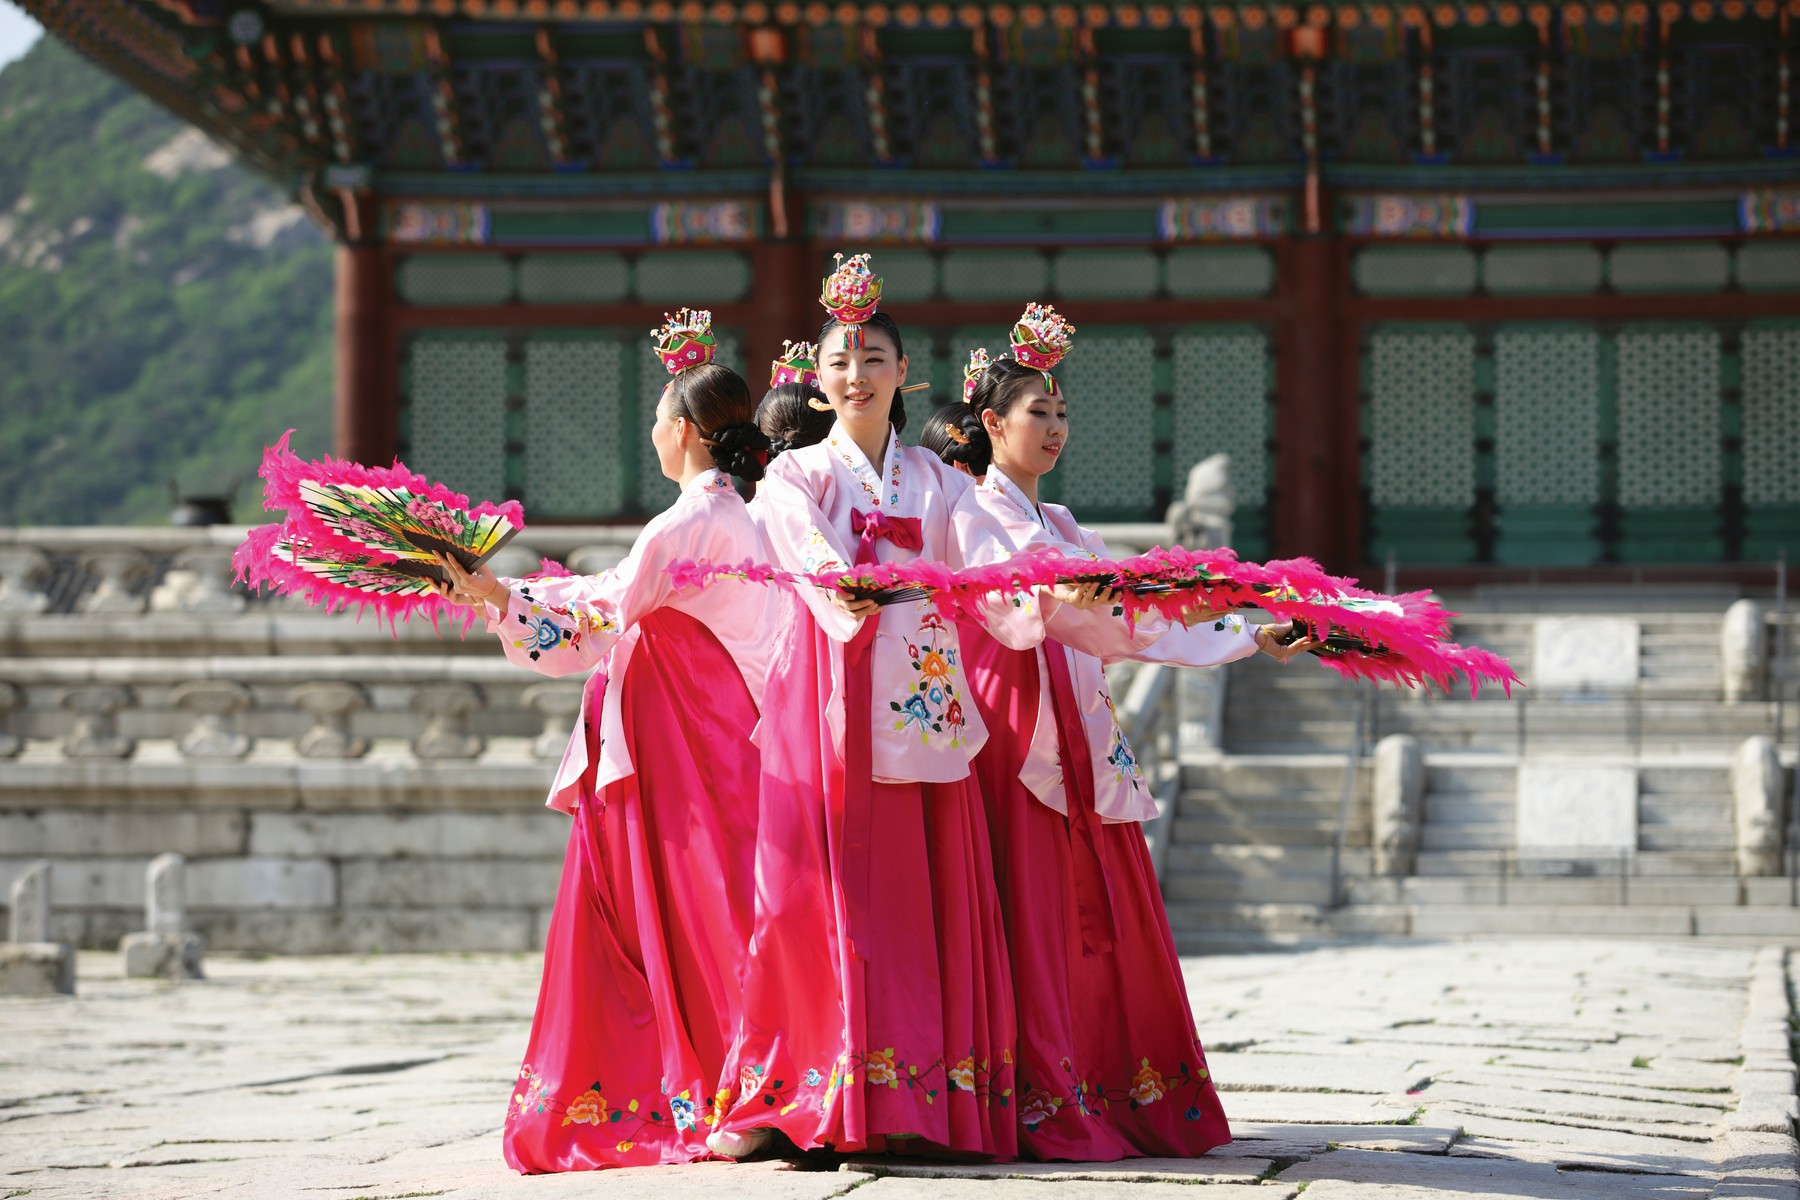 Buchaechum (Fan Dance) A traditional form of Korean dance usually performed by groups of female dancers